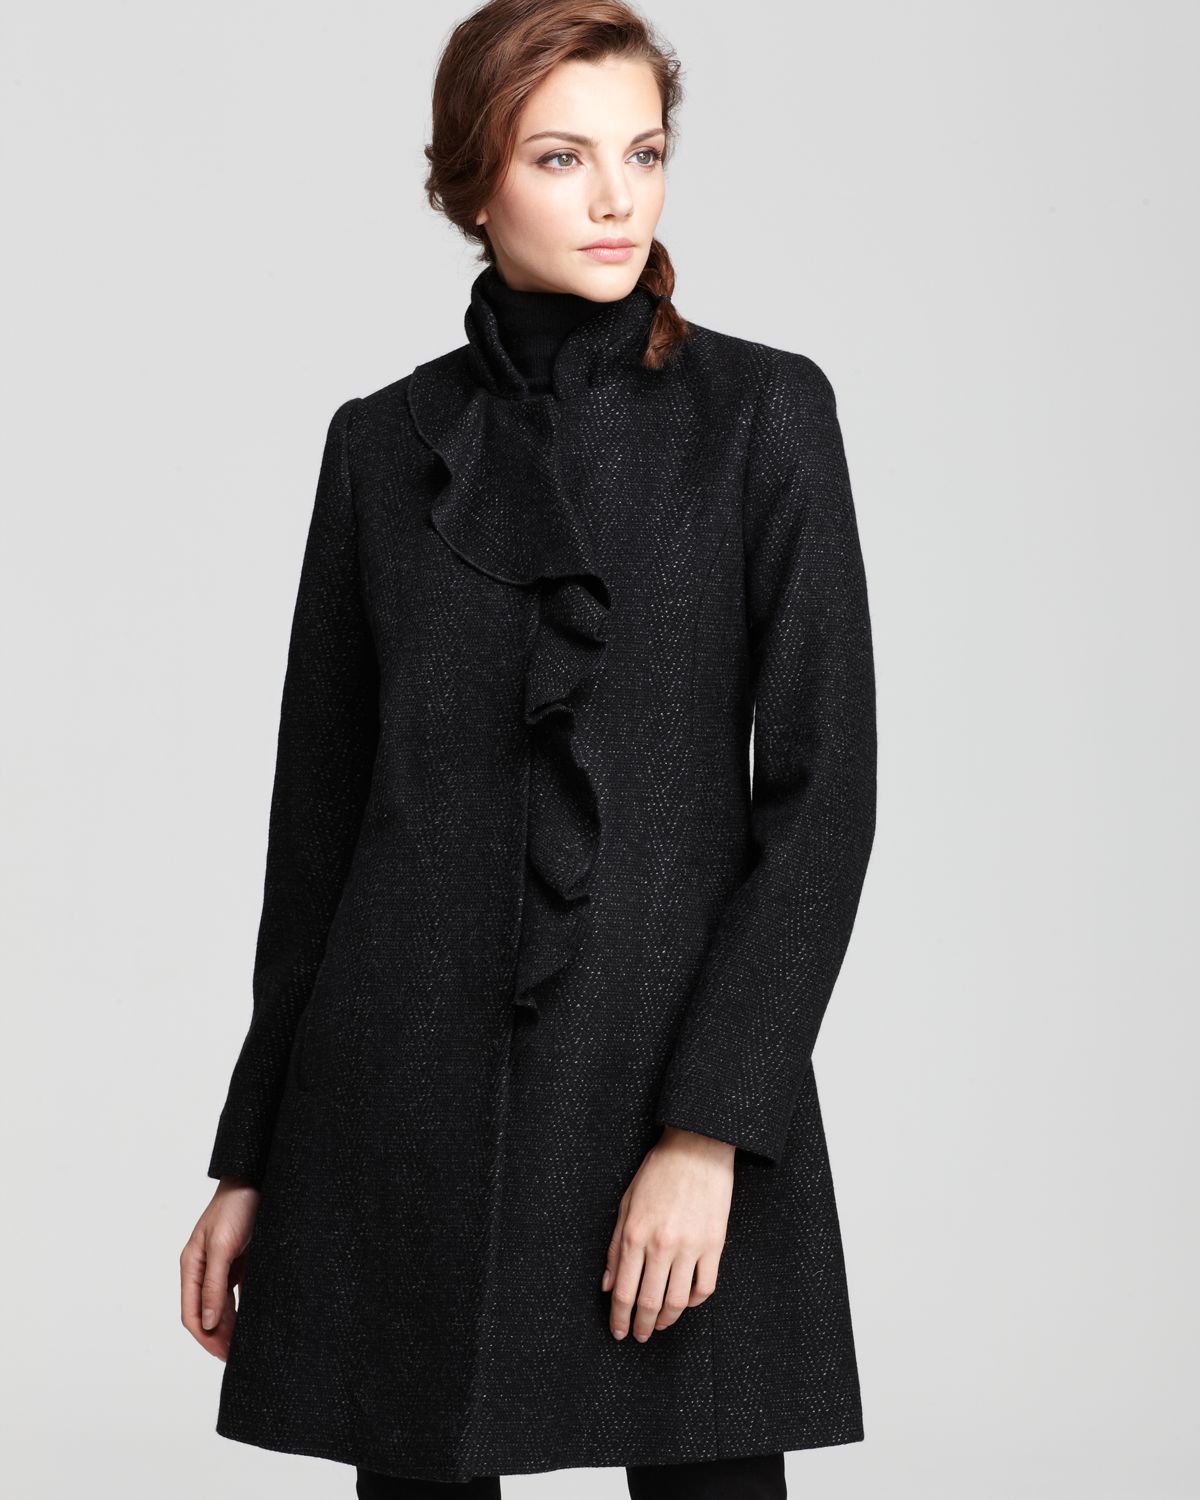 Dkny Stand Collar Coat with Ruffle Front in Black (Herringbone) | Lyst